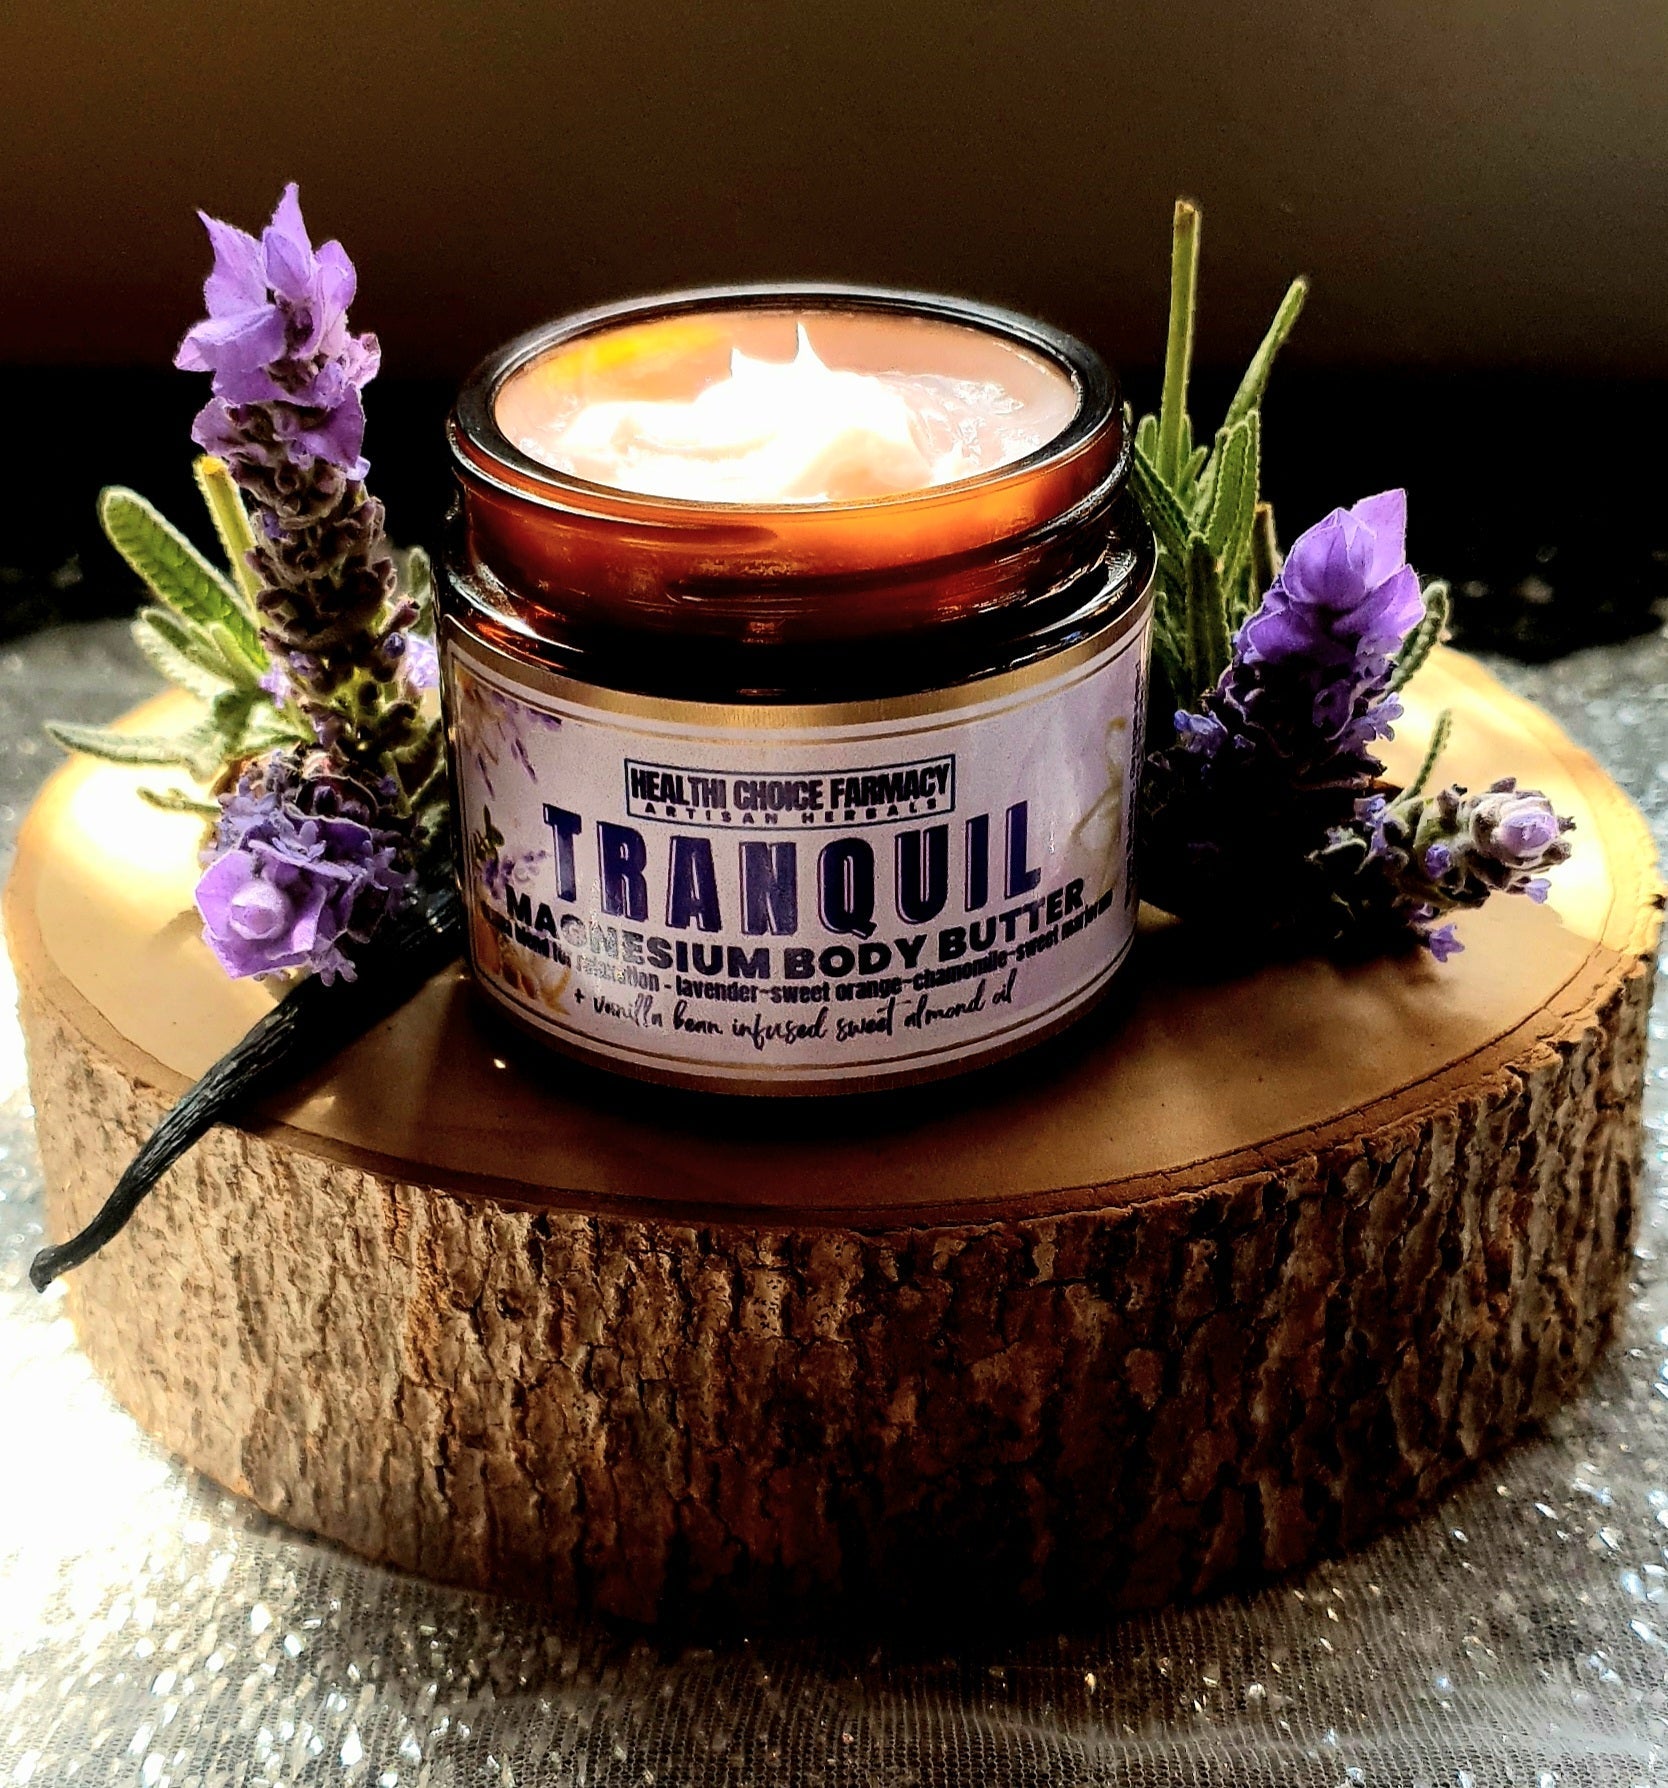 TRANQUIL Vanilla Bean infused Magnesium Butter ~ aroma blend for sleep - ALL NATURAL - Healthi Choice Farmacy